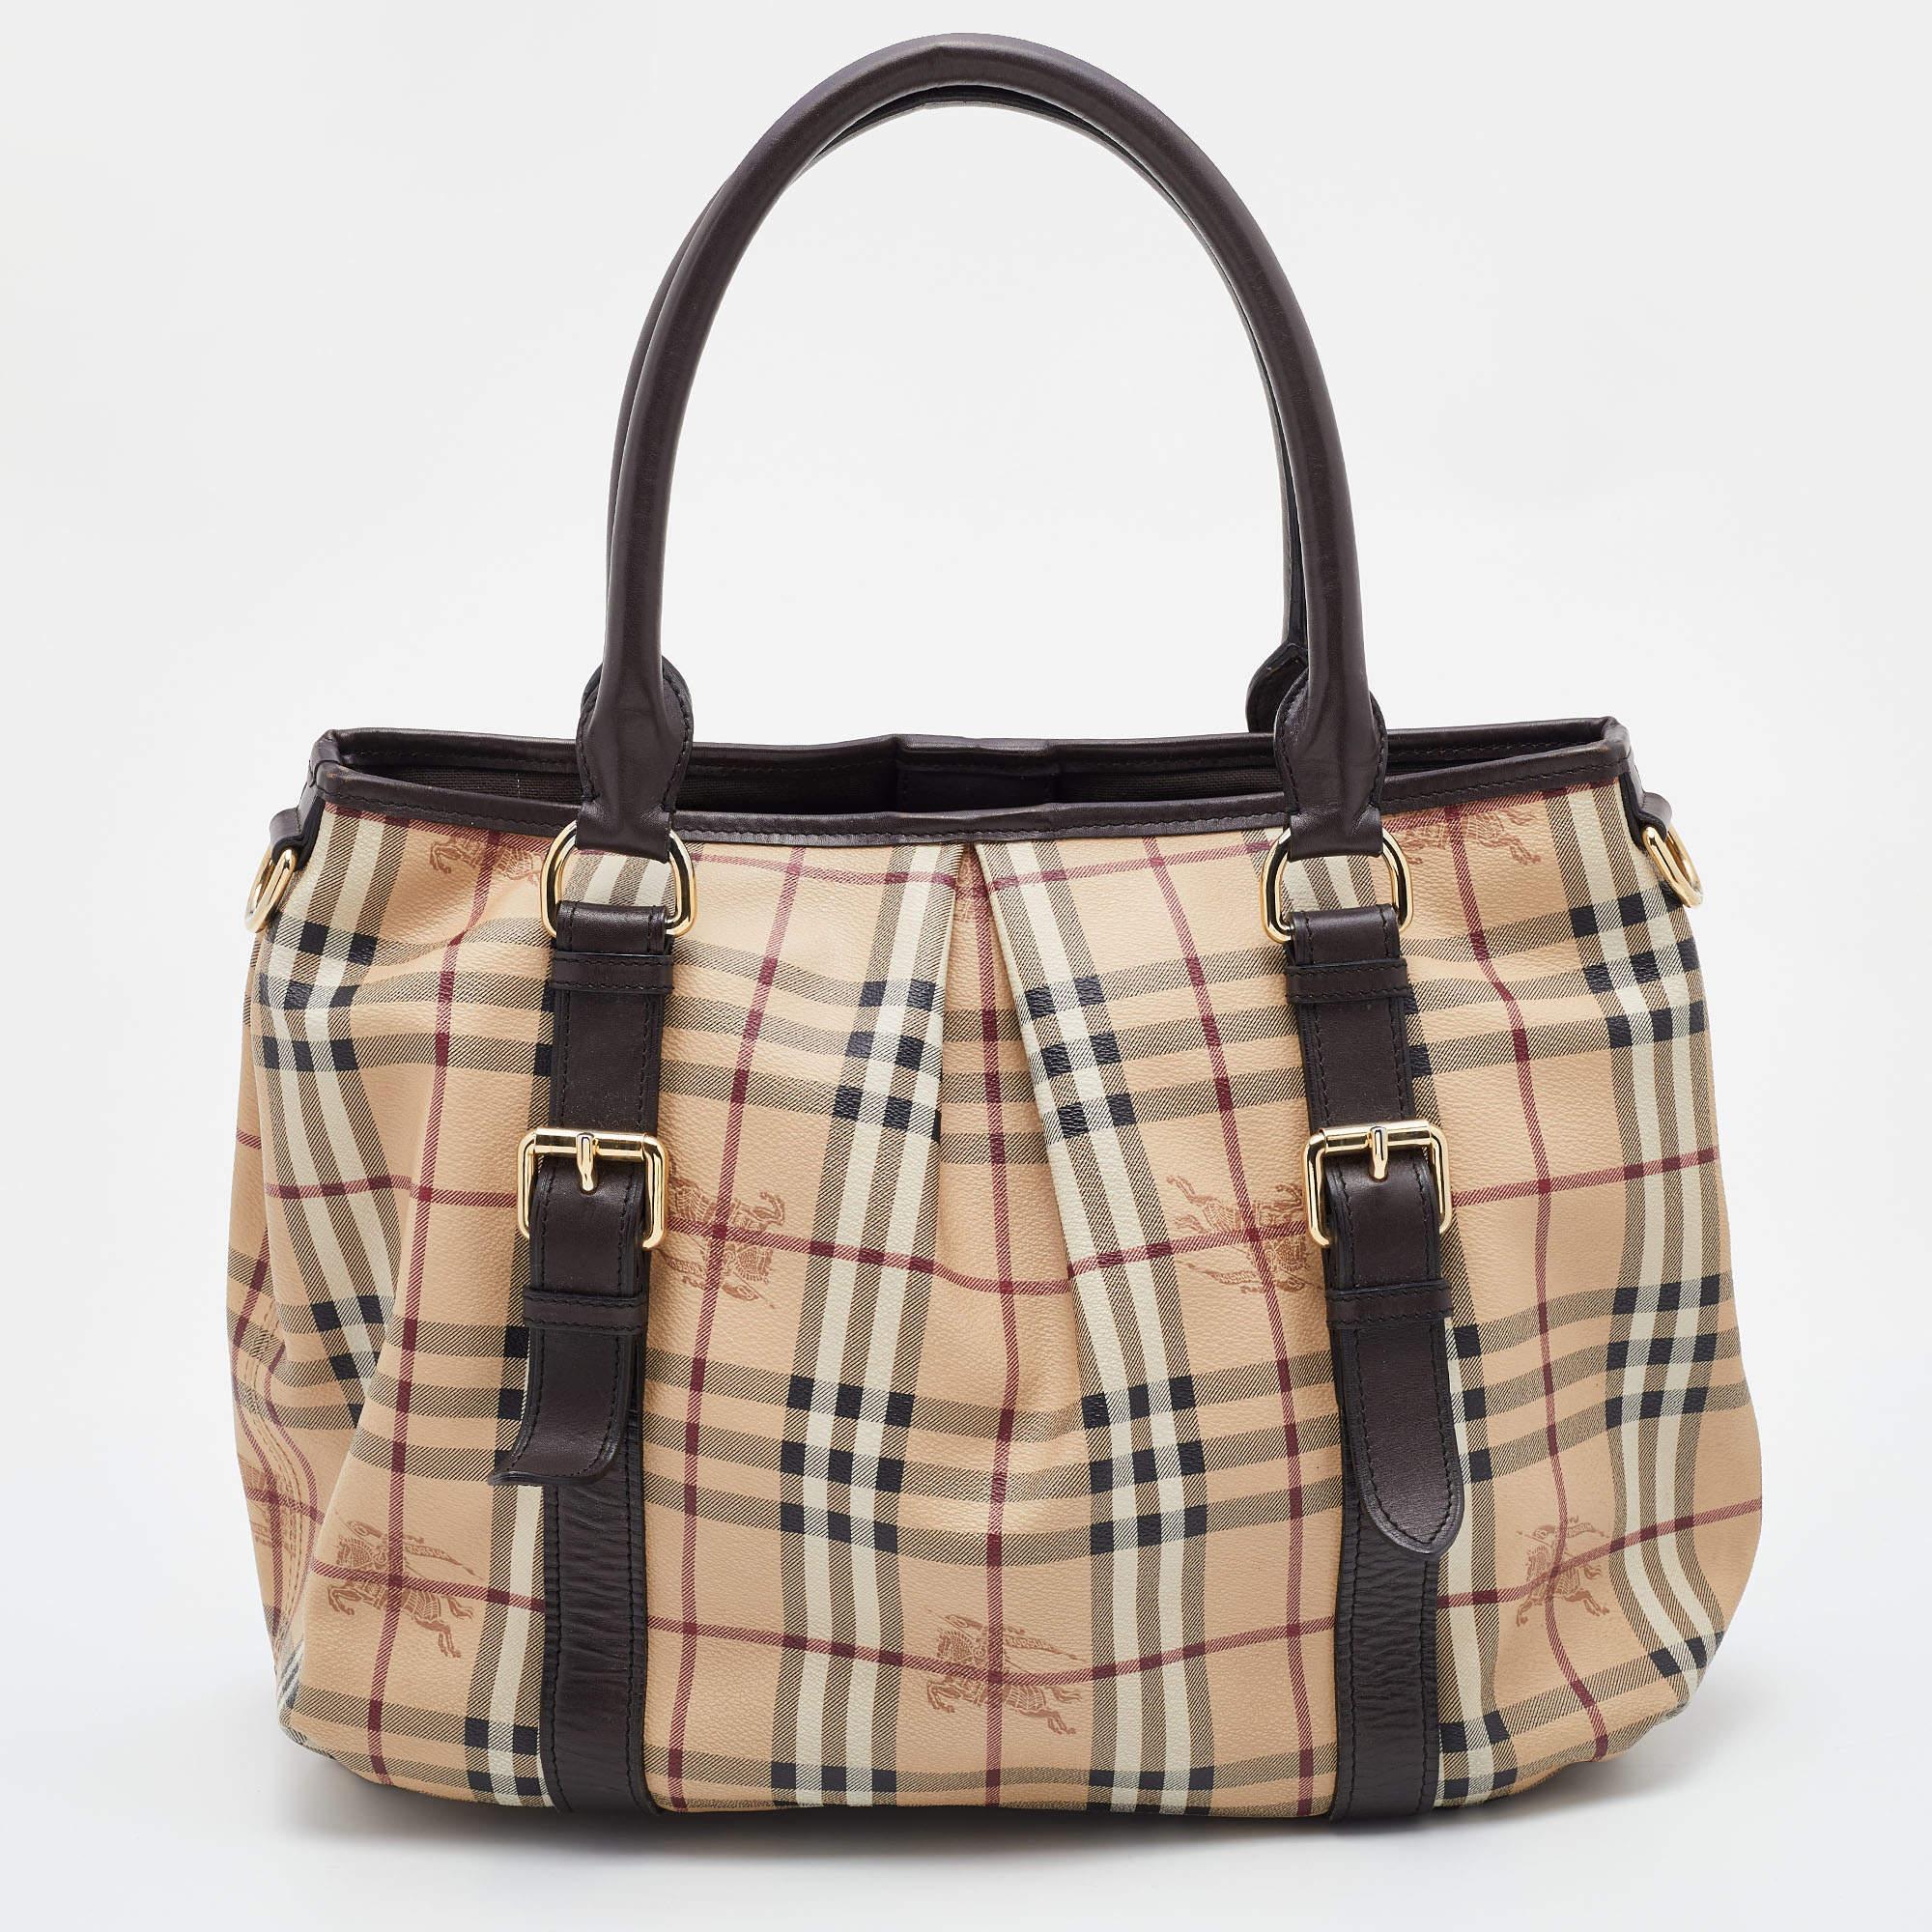 Striking a beautiful balance between essentiality and opulence, this tote from the House of Burberry ensures that your handbag requirements are taken care of. It is equipped with practical features for all-day ease.

Includes: Detachable Strap
